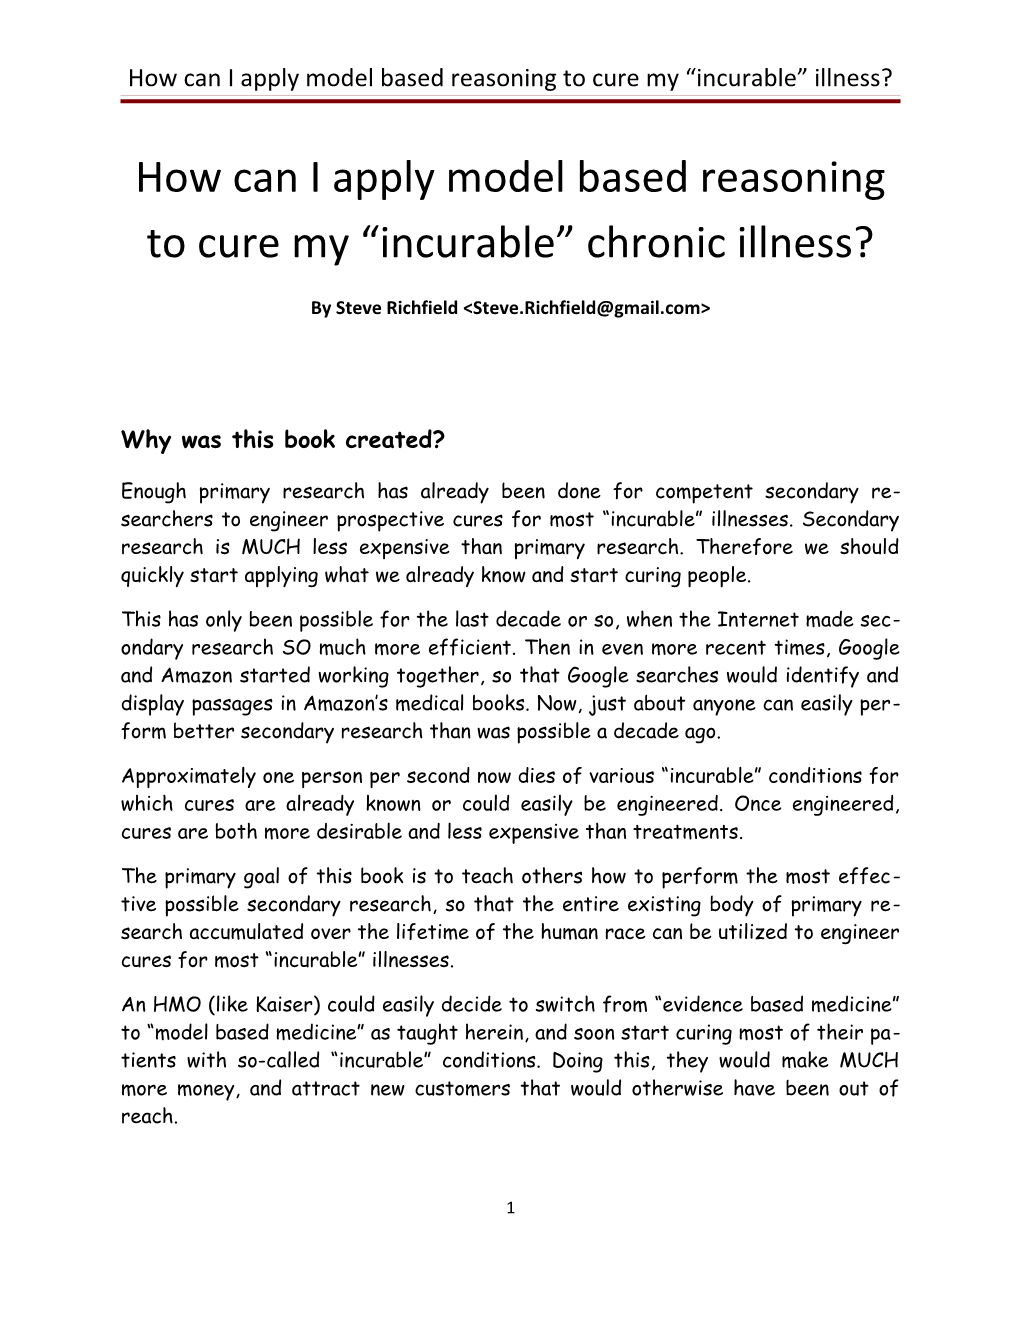 How Can I Apply Model Based Reasoning to Cure My Incurable Illness?